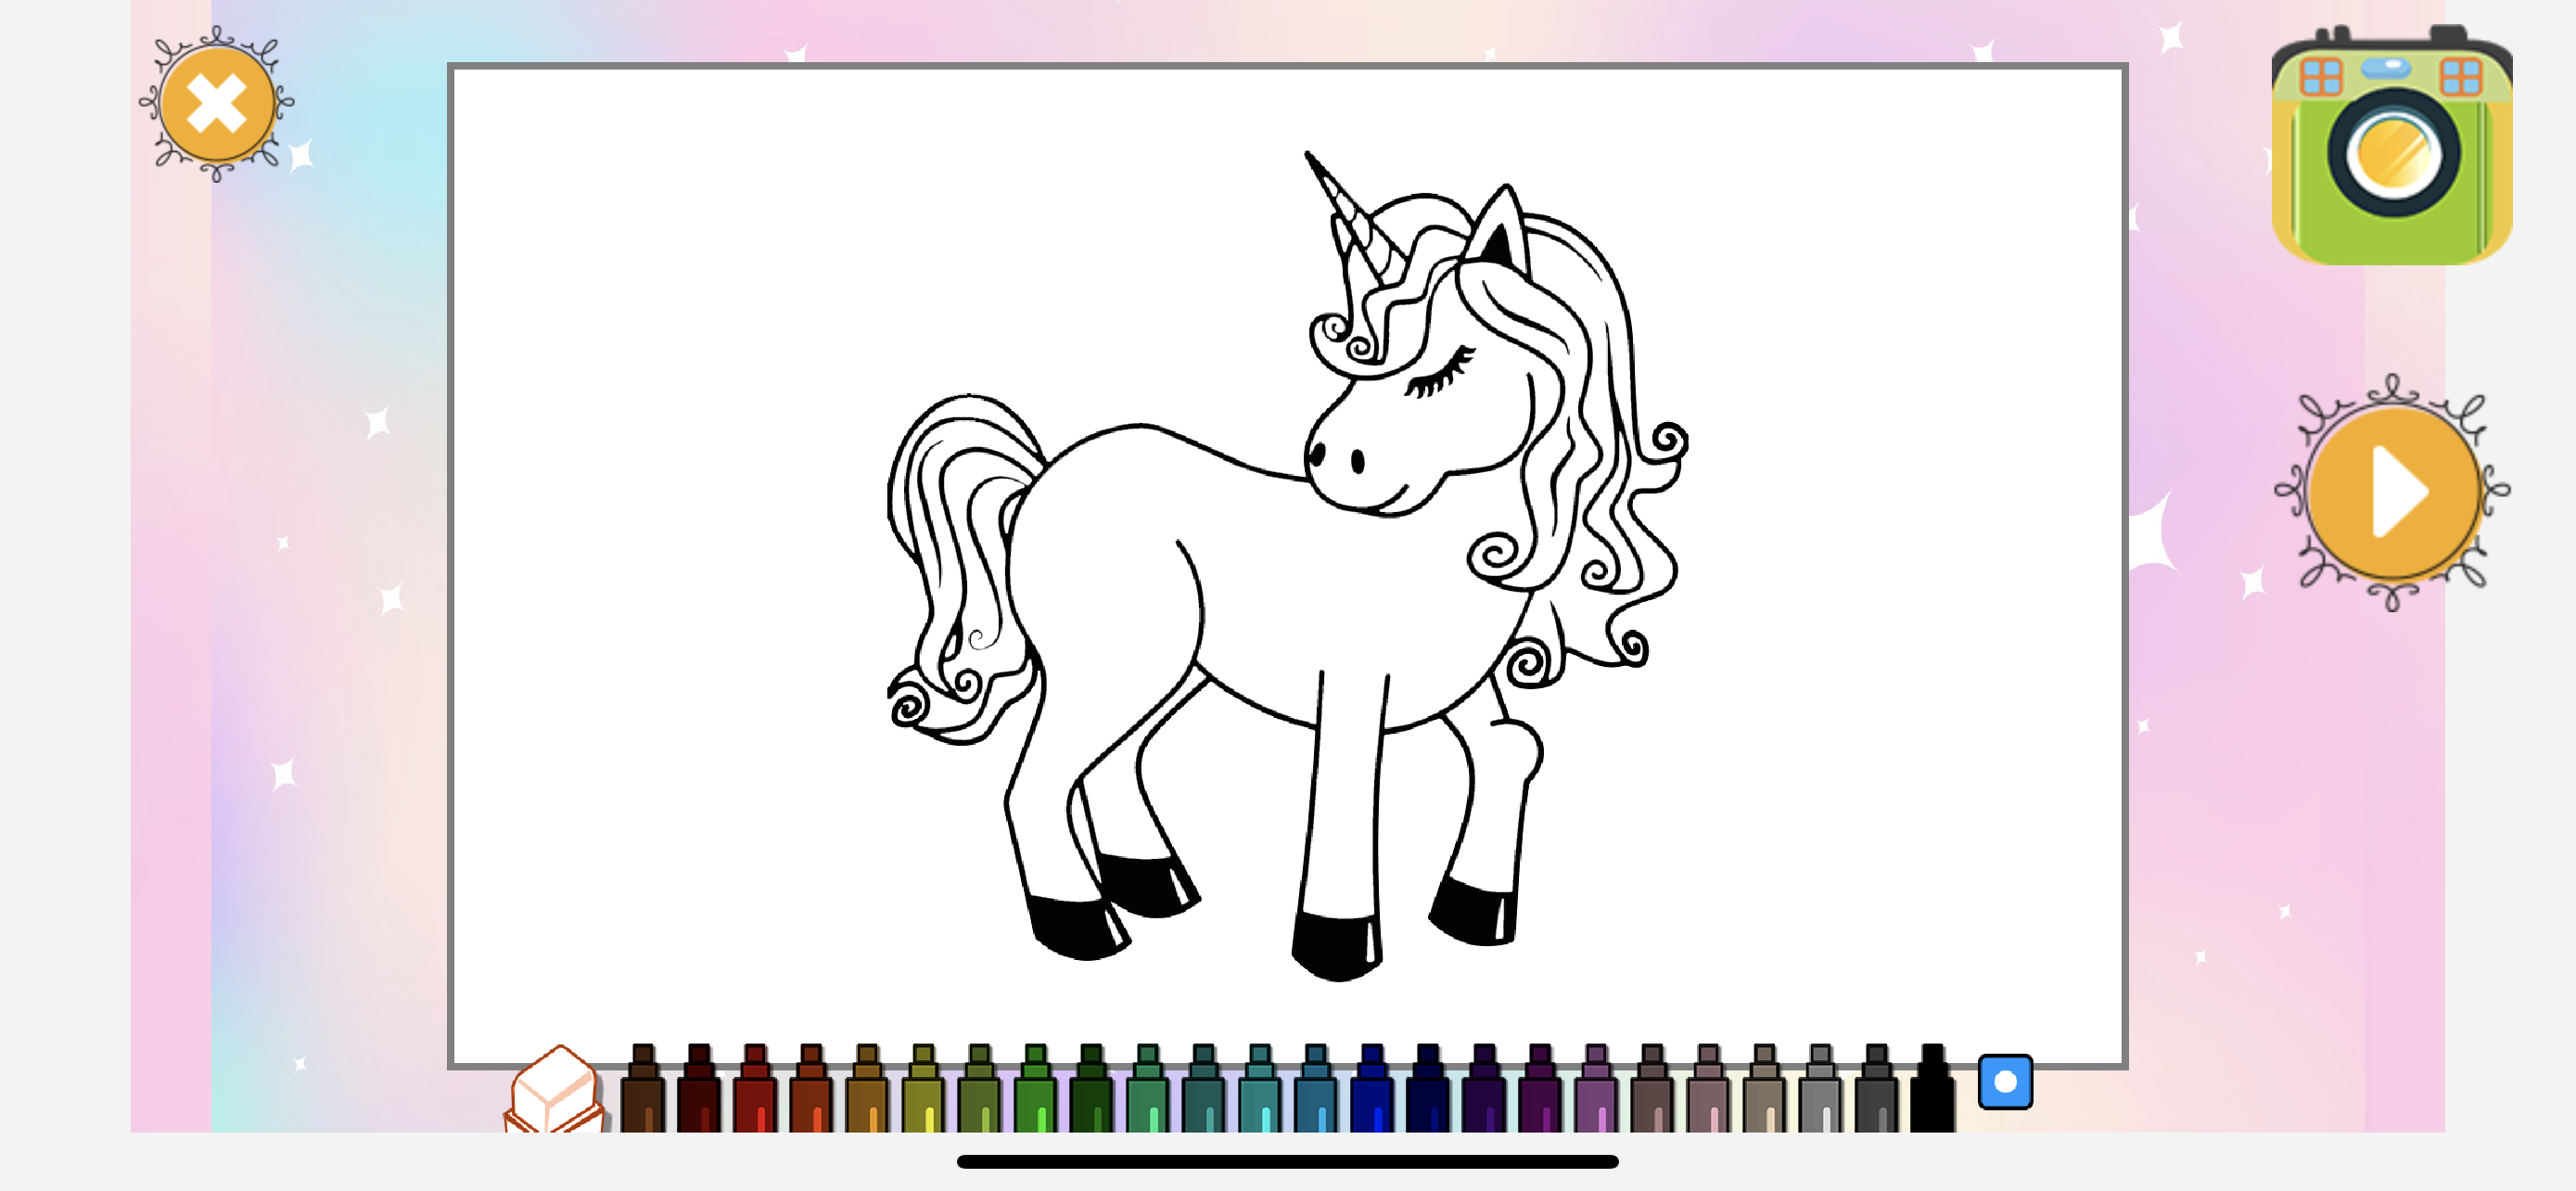 Free Unicorn Coloring App for kids - Unicorn Colouring Games